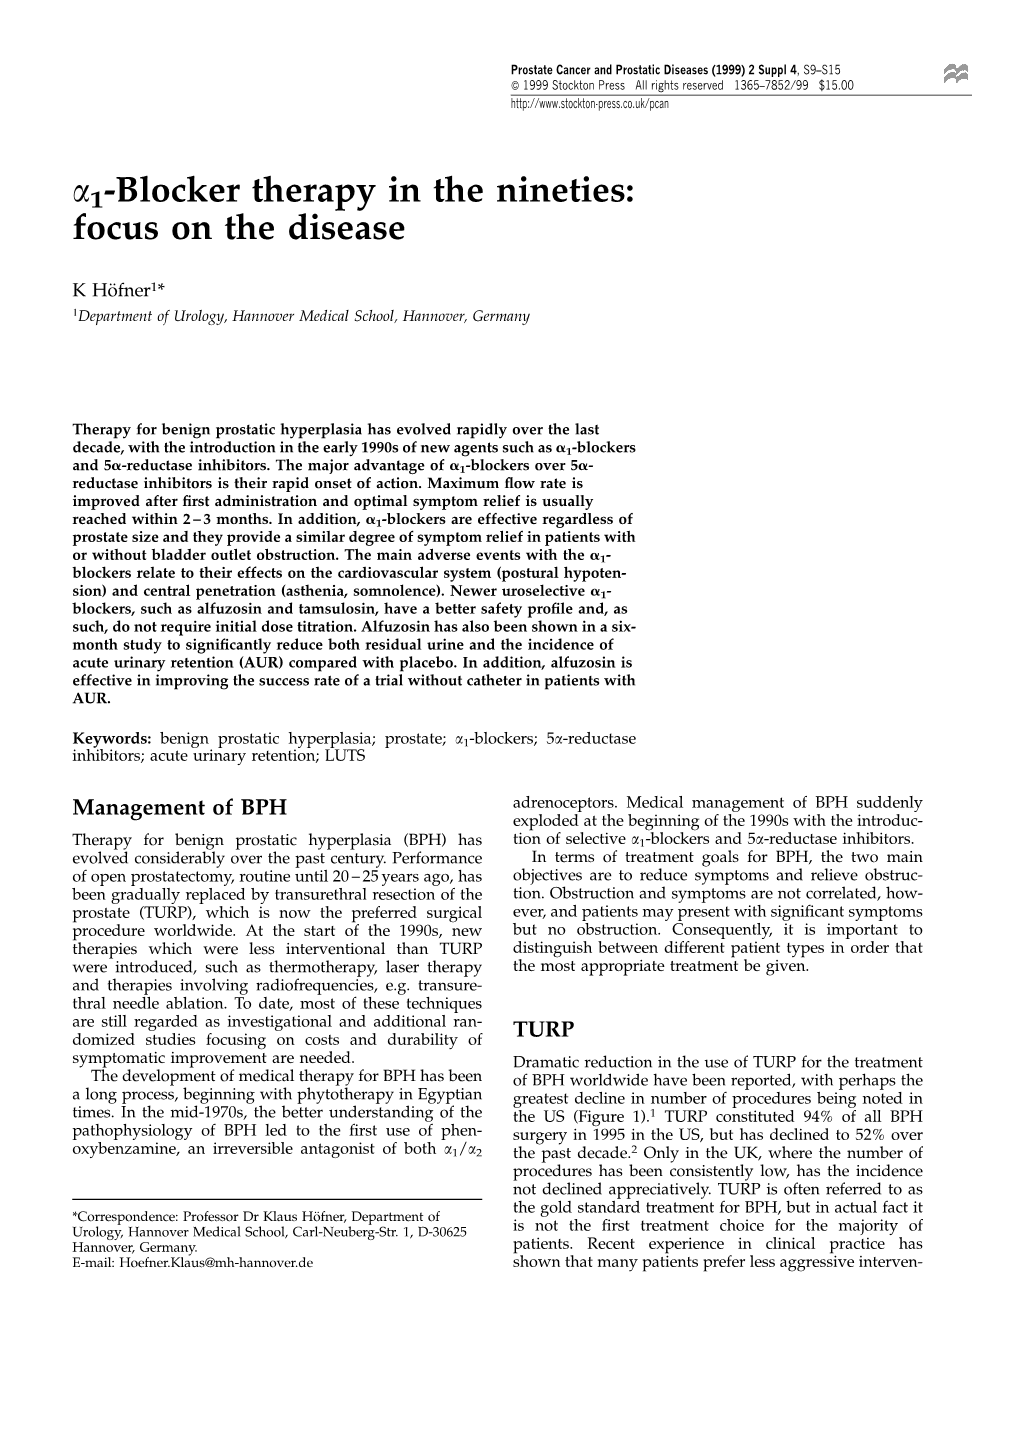 A1-Blocker Therapy in the Nineties: Focus on the Disease